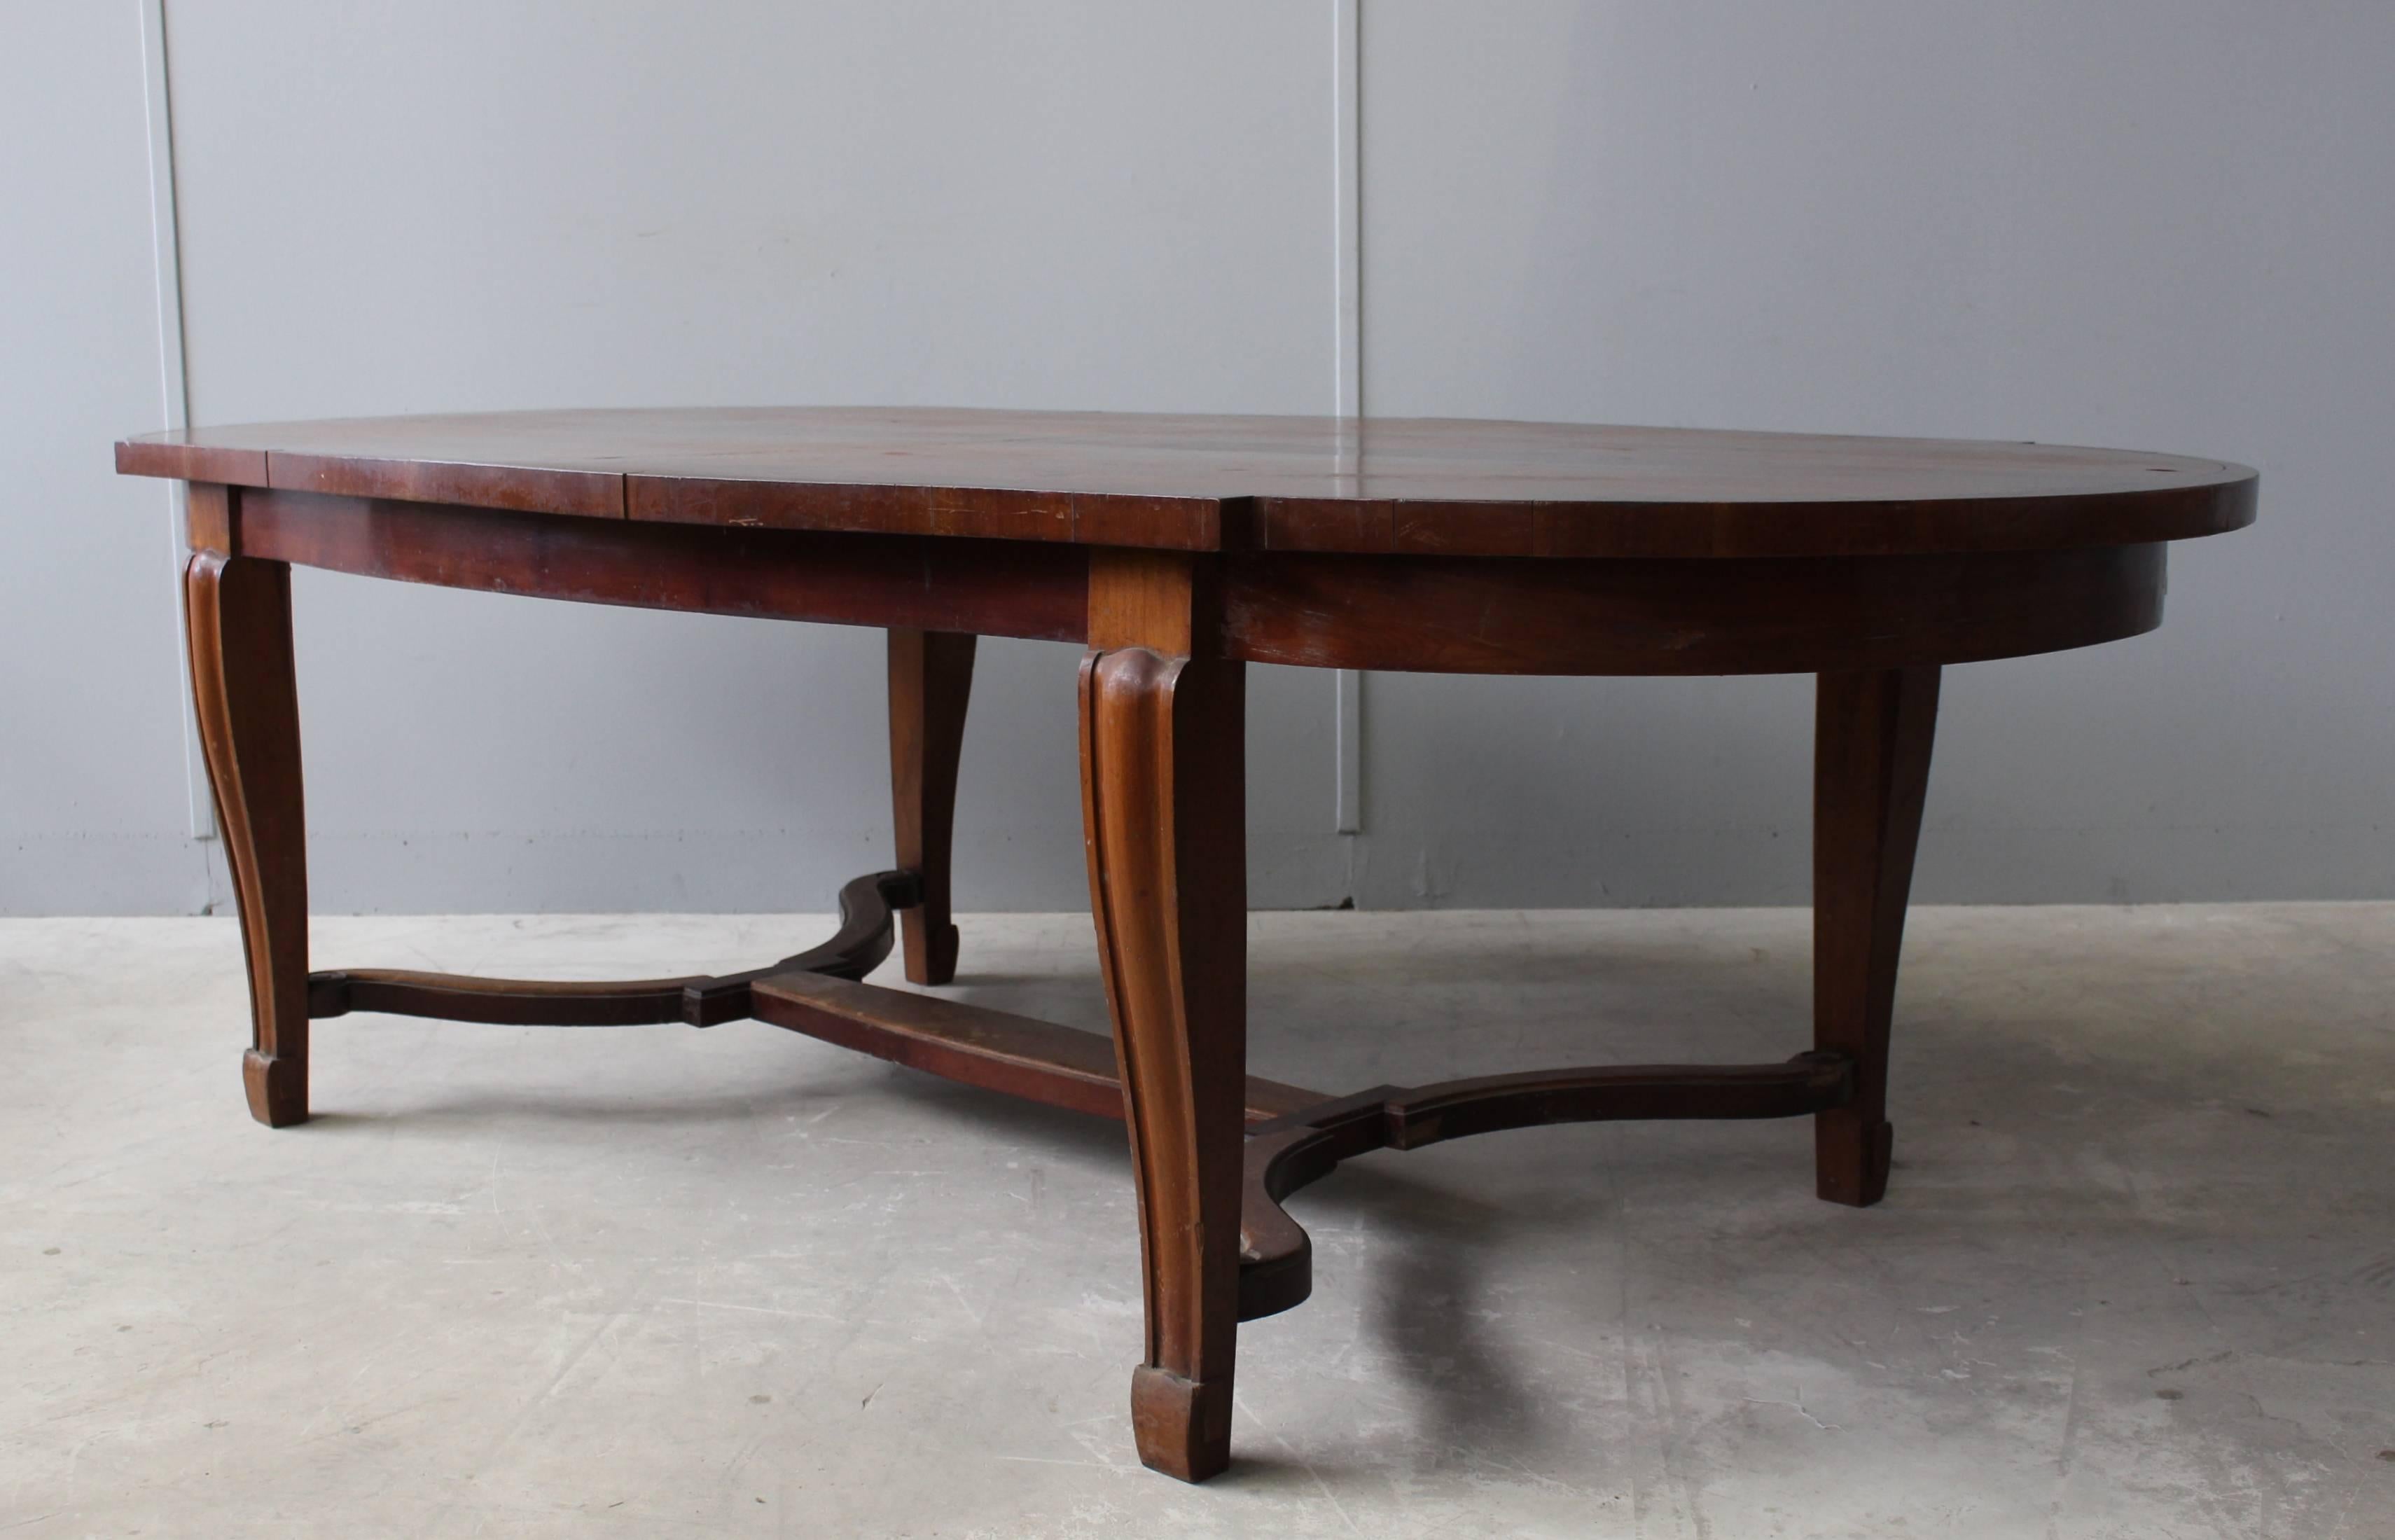 A fine French Art Deco mahogany dining table in the manner of Arbus.
A matching console with a marble top is also available. 
